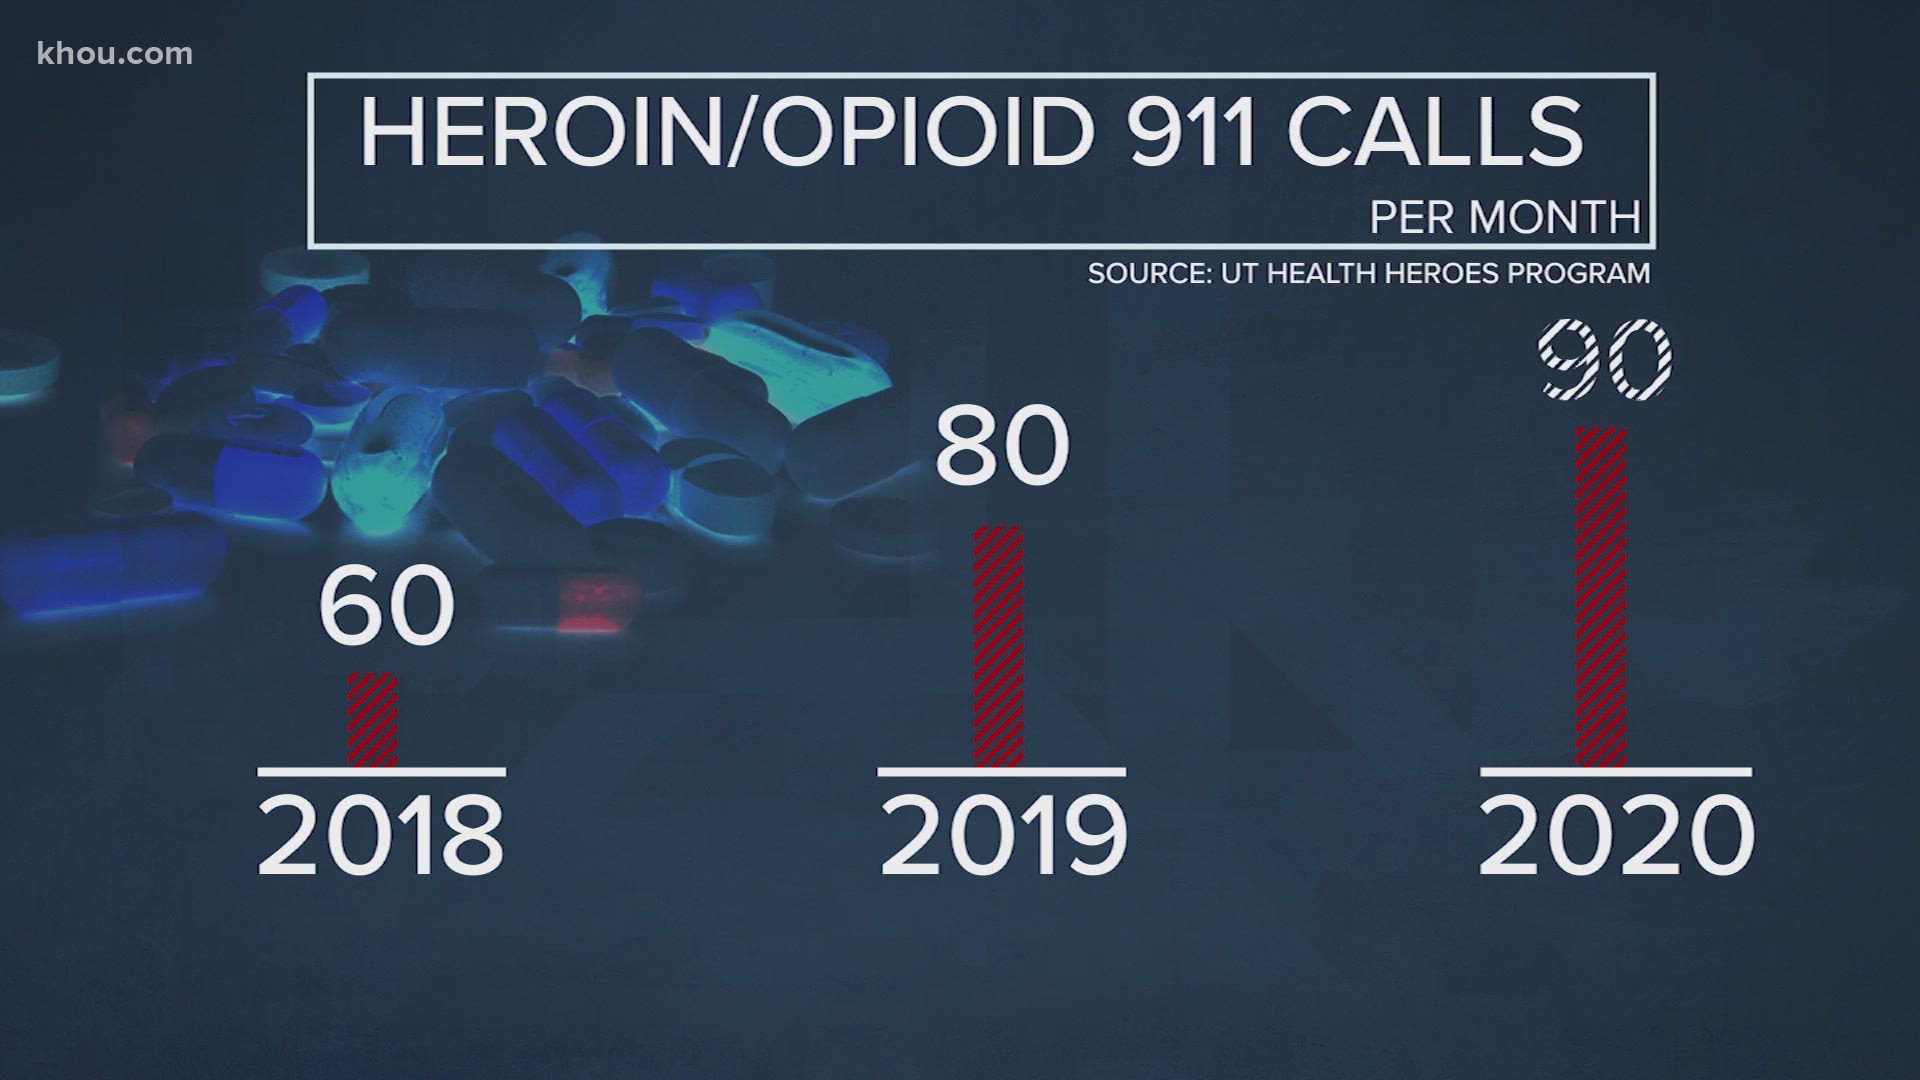 Dr. James Langabeer said he's seen calls related to opioid abuse up to an average of 90 calls a month. That’s a 50 percent increase over three years.